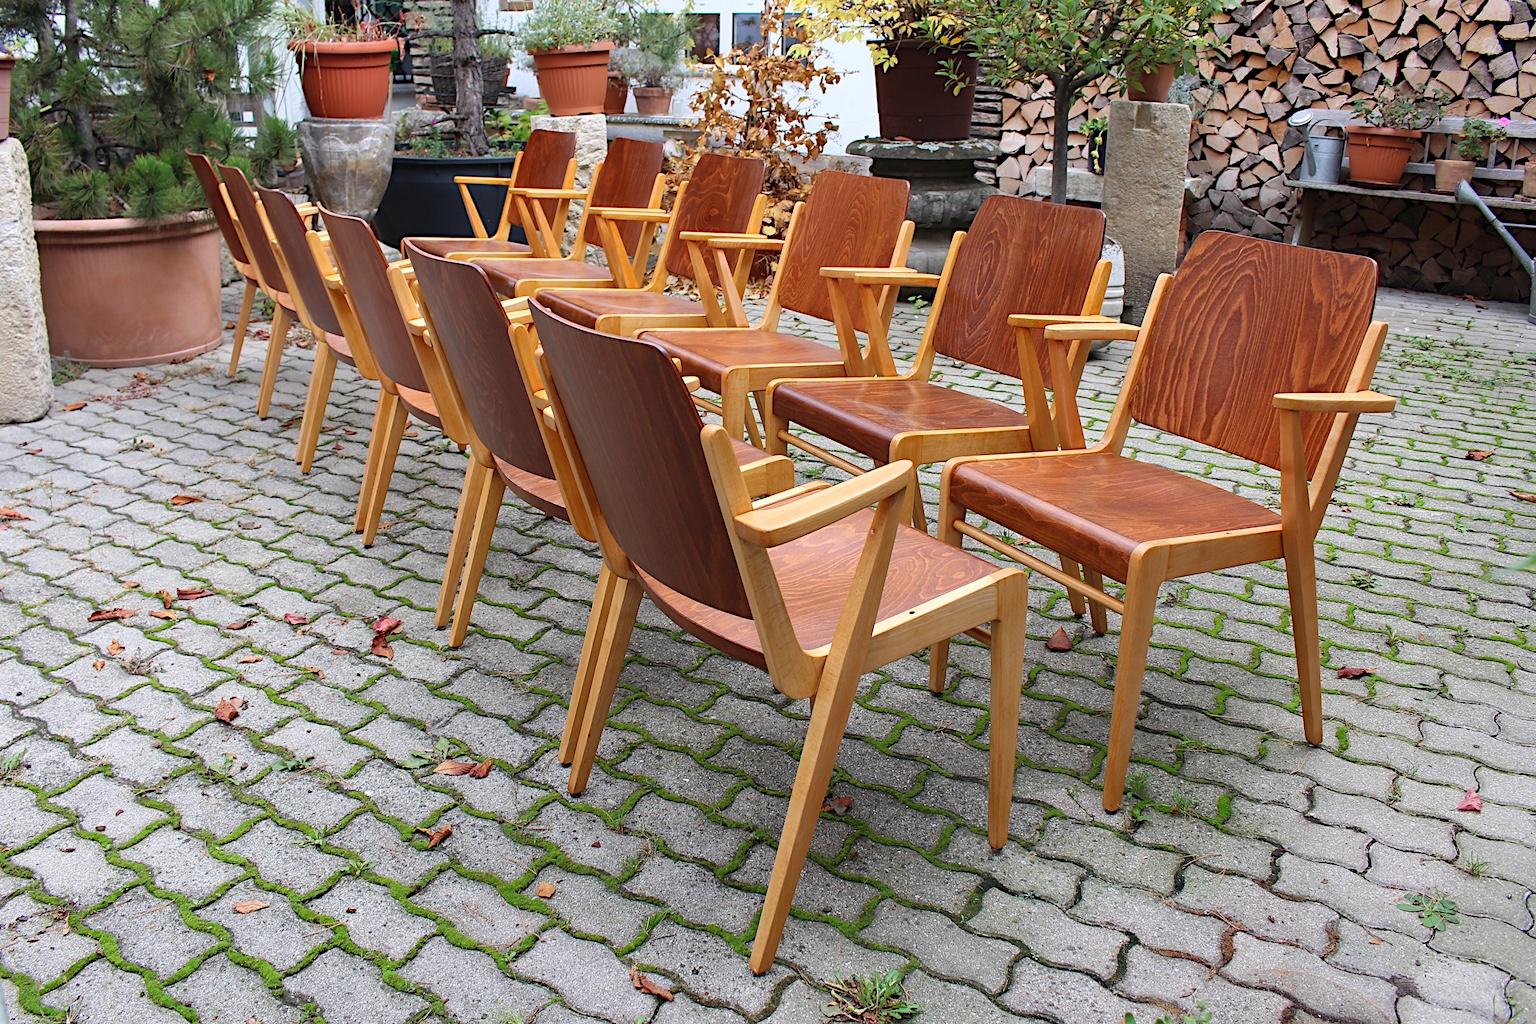 Mid Century Modern twelve ( 12 ) bicolor beech vintage armchairs or dining chairs by Franz Schuster for Wiesner - Hager 1959 Vienna.
An amazing and comfortable bicolor set of twelve dining chairs with armrests in wonderful soft brown color. While